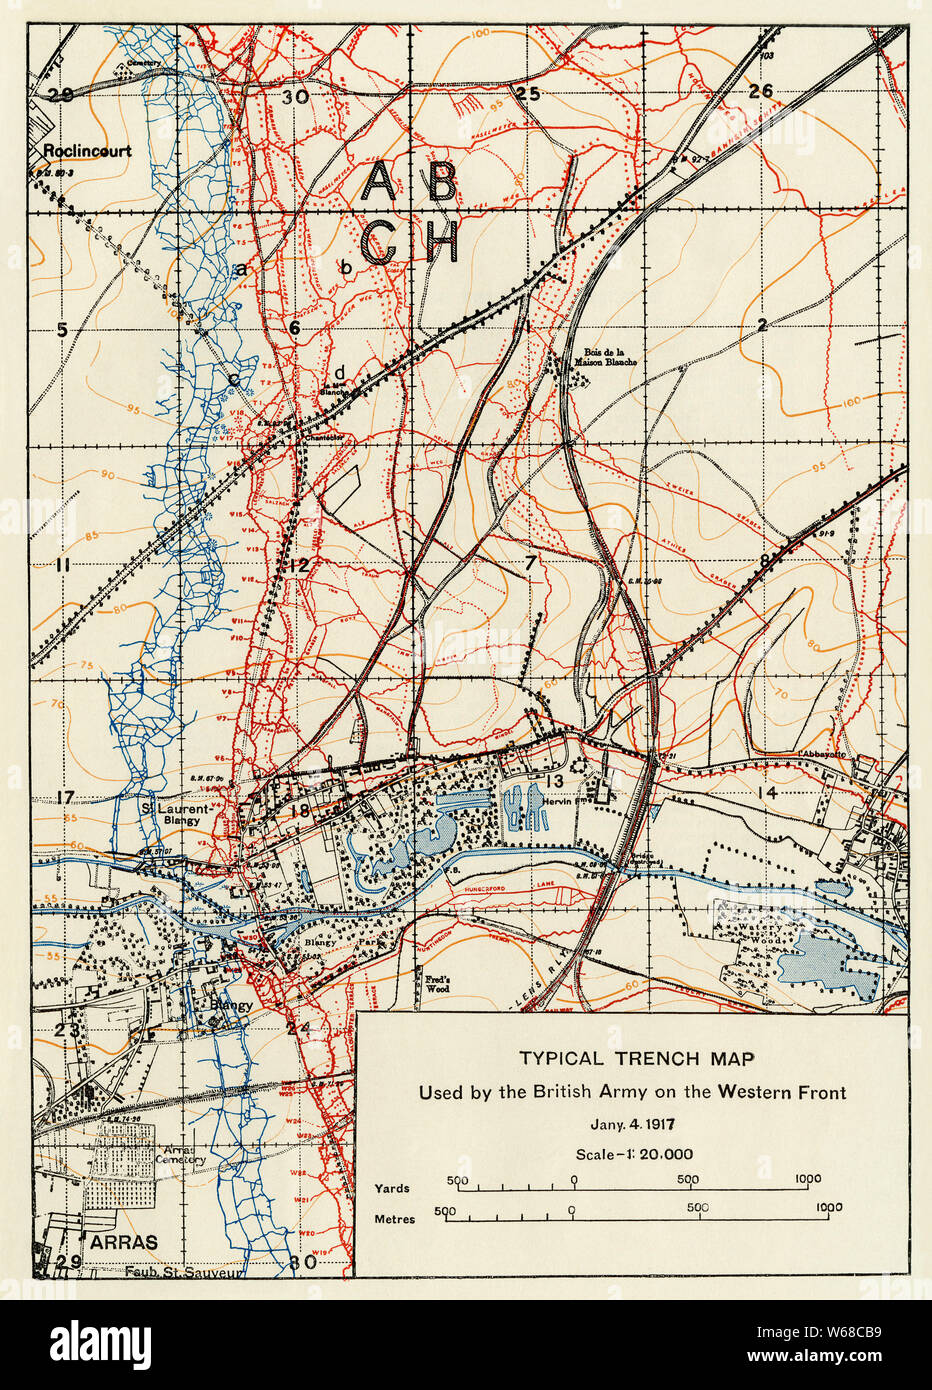 TRENCH MAP OF ROCLINCOURT 